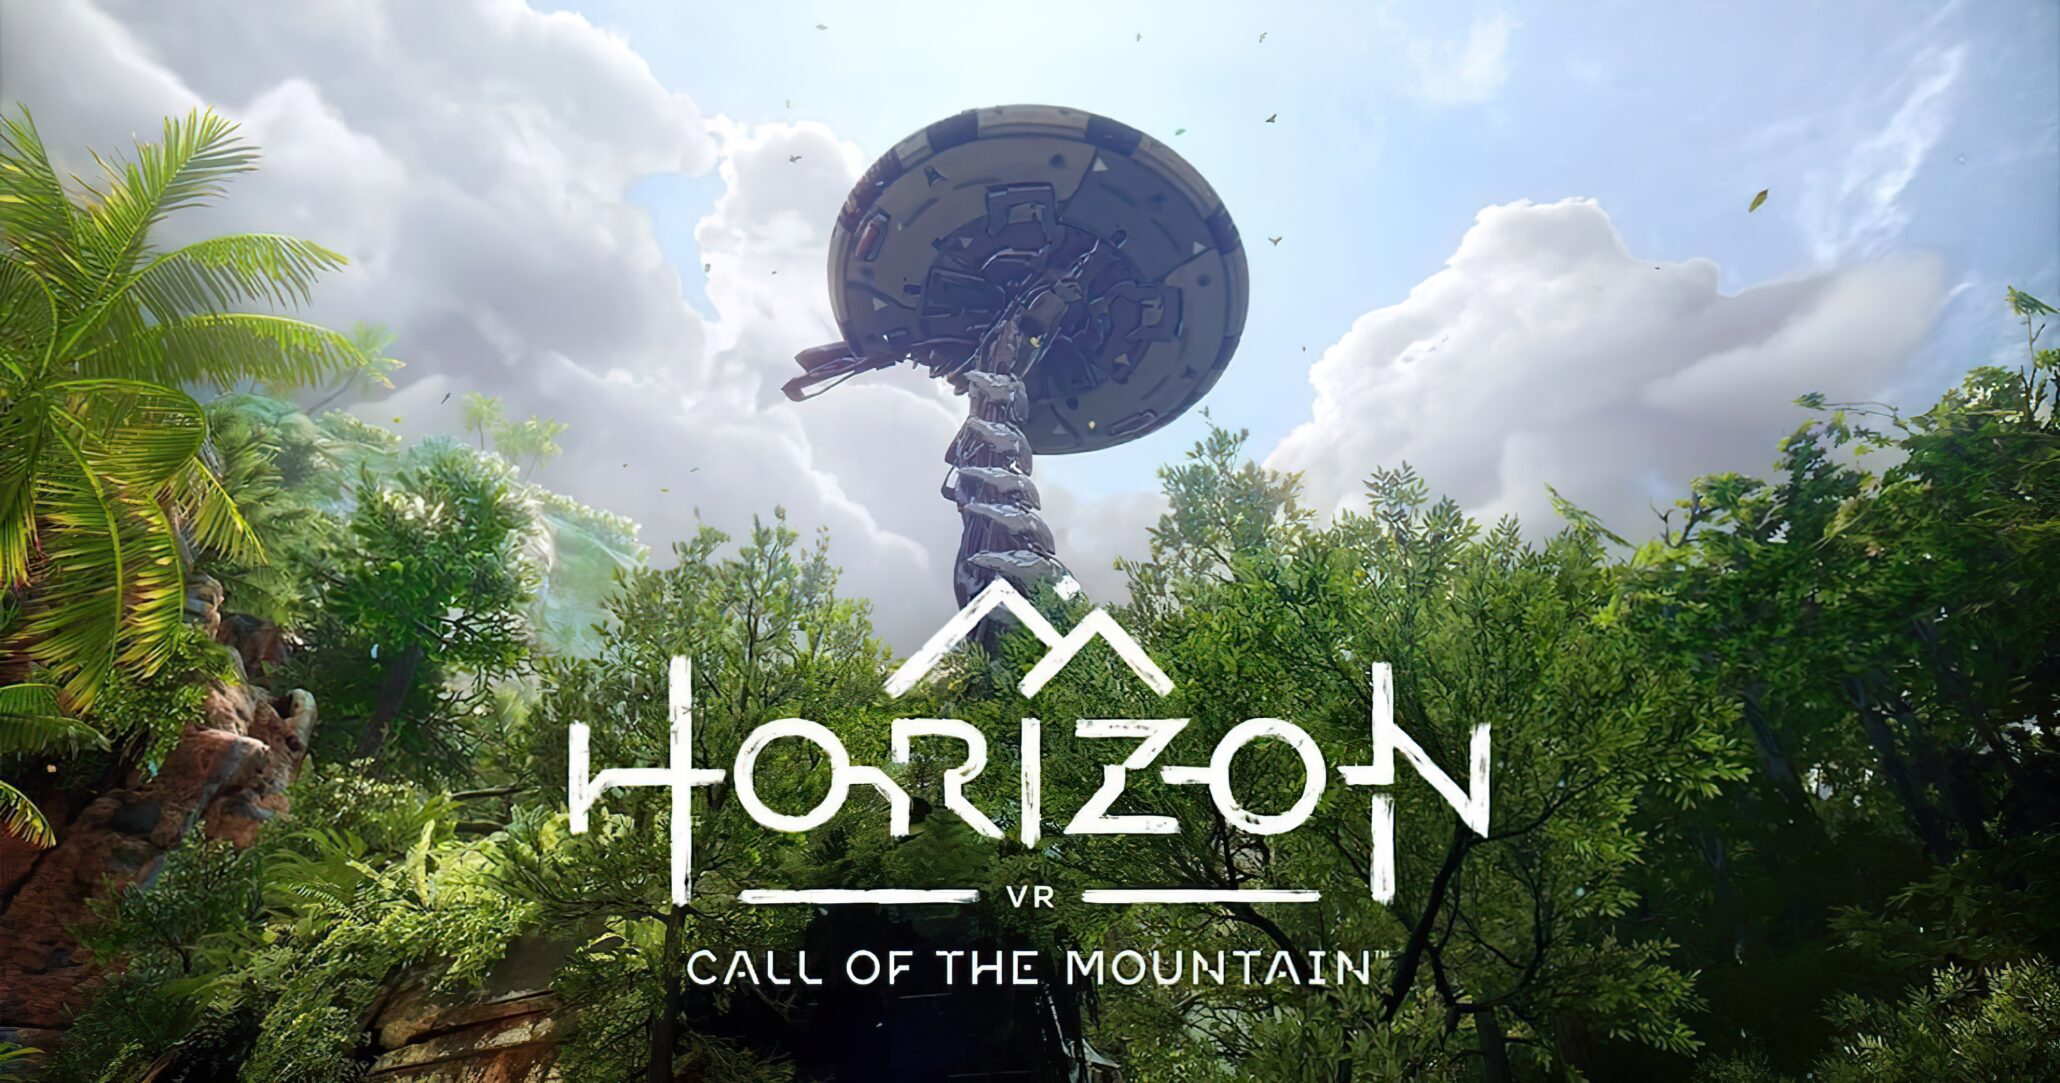 Horizon Call of the Mountain, created exclusively for